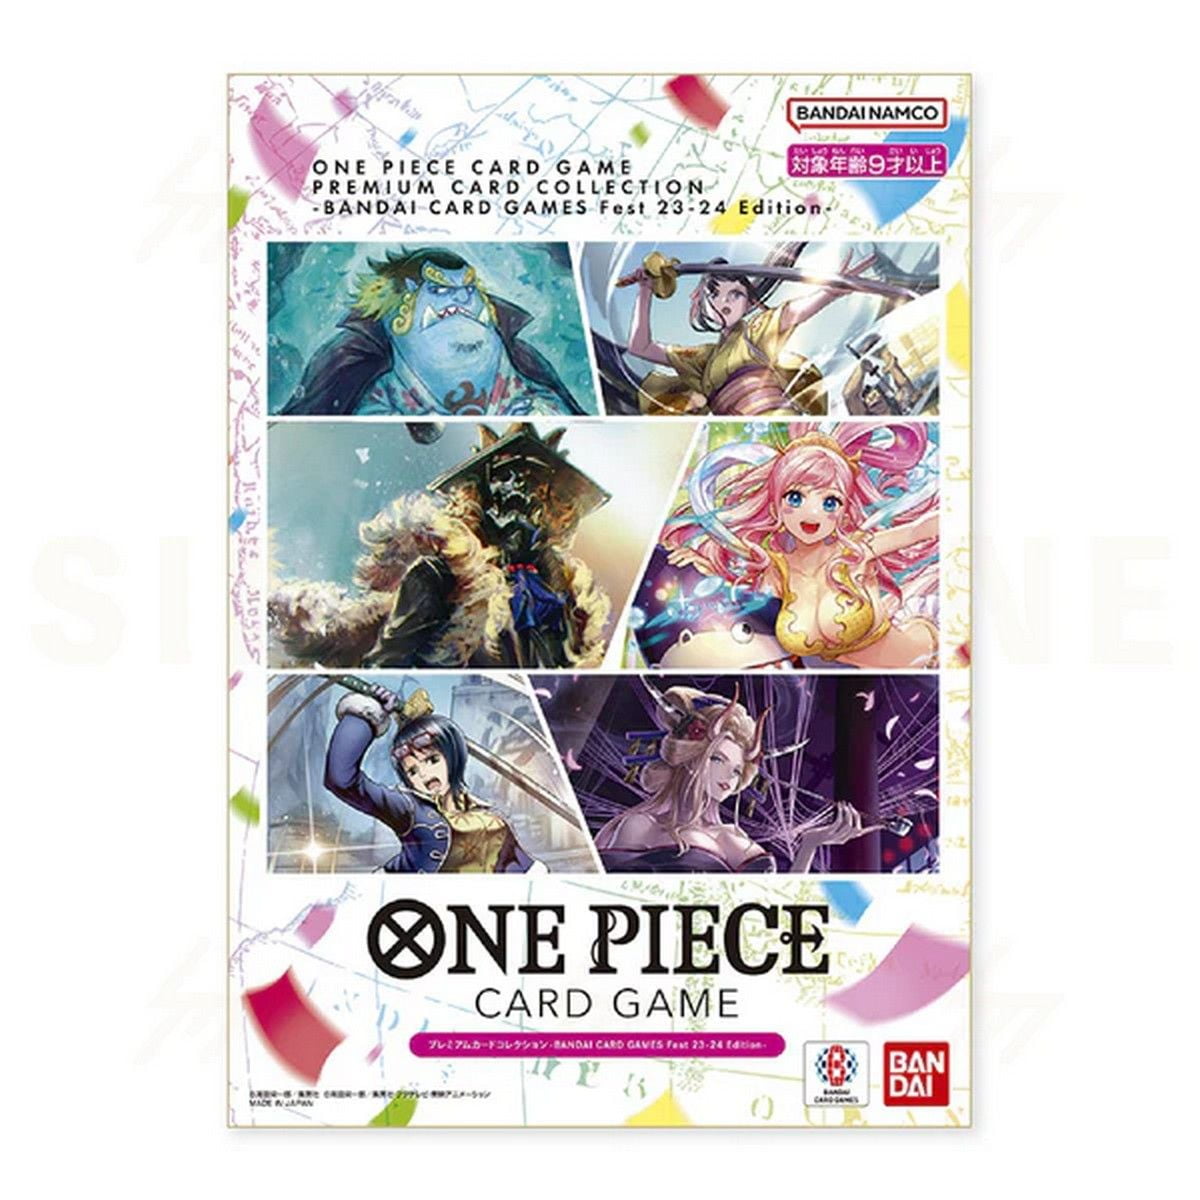 One Piece Card Game: Premium Card Collection - Bandai Card Games Fest. 23-24 Edition